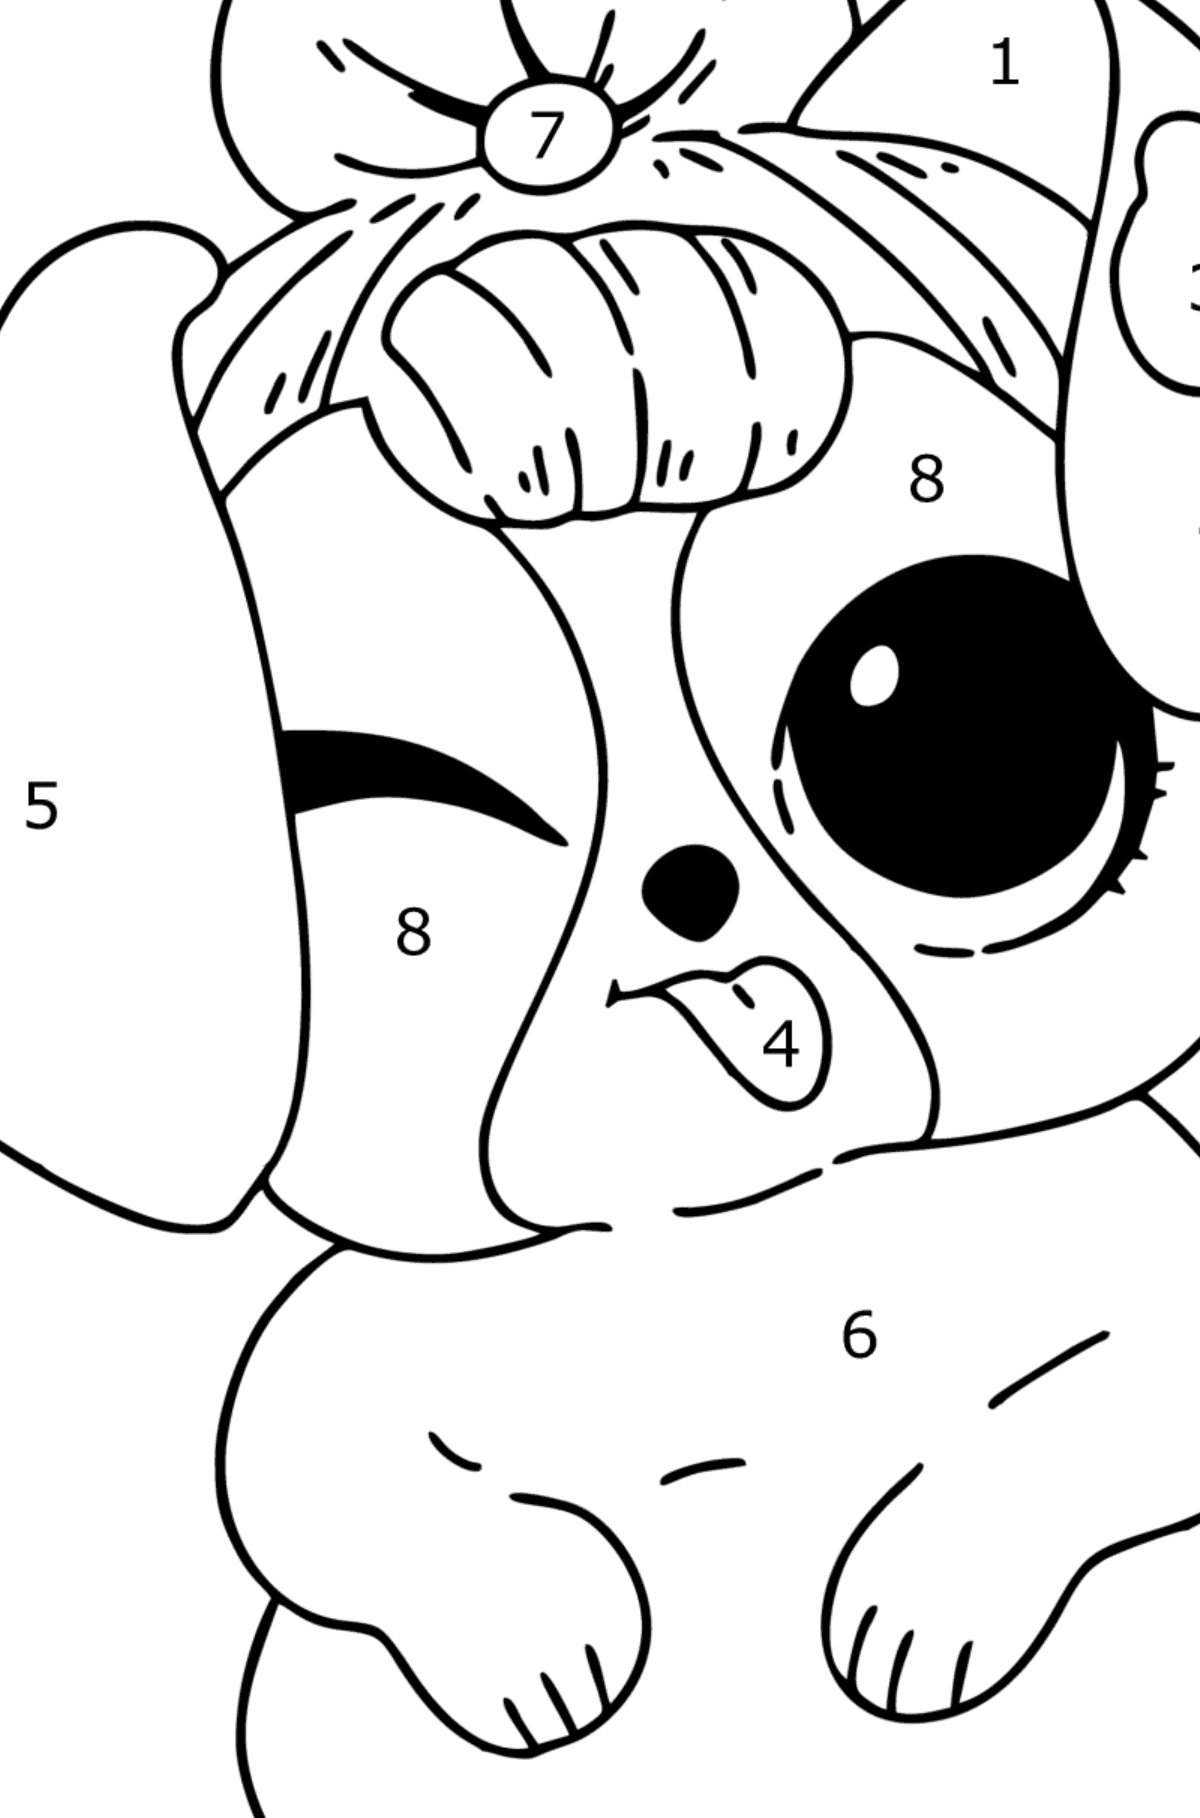 Coloring page LOL pet cute puppy - Coloring by Numbers for Kids